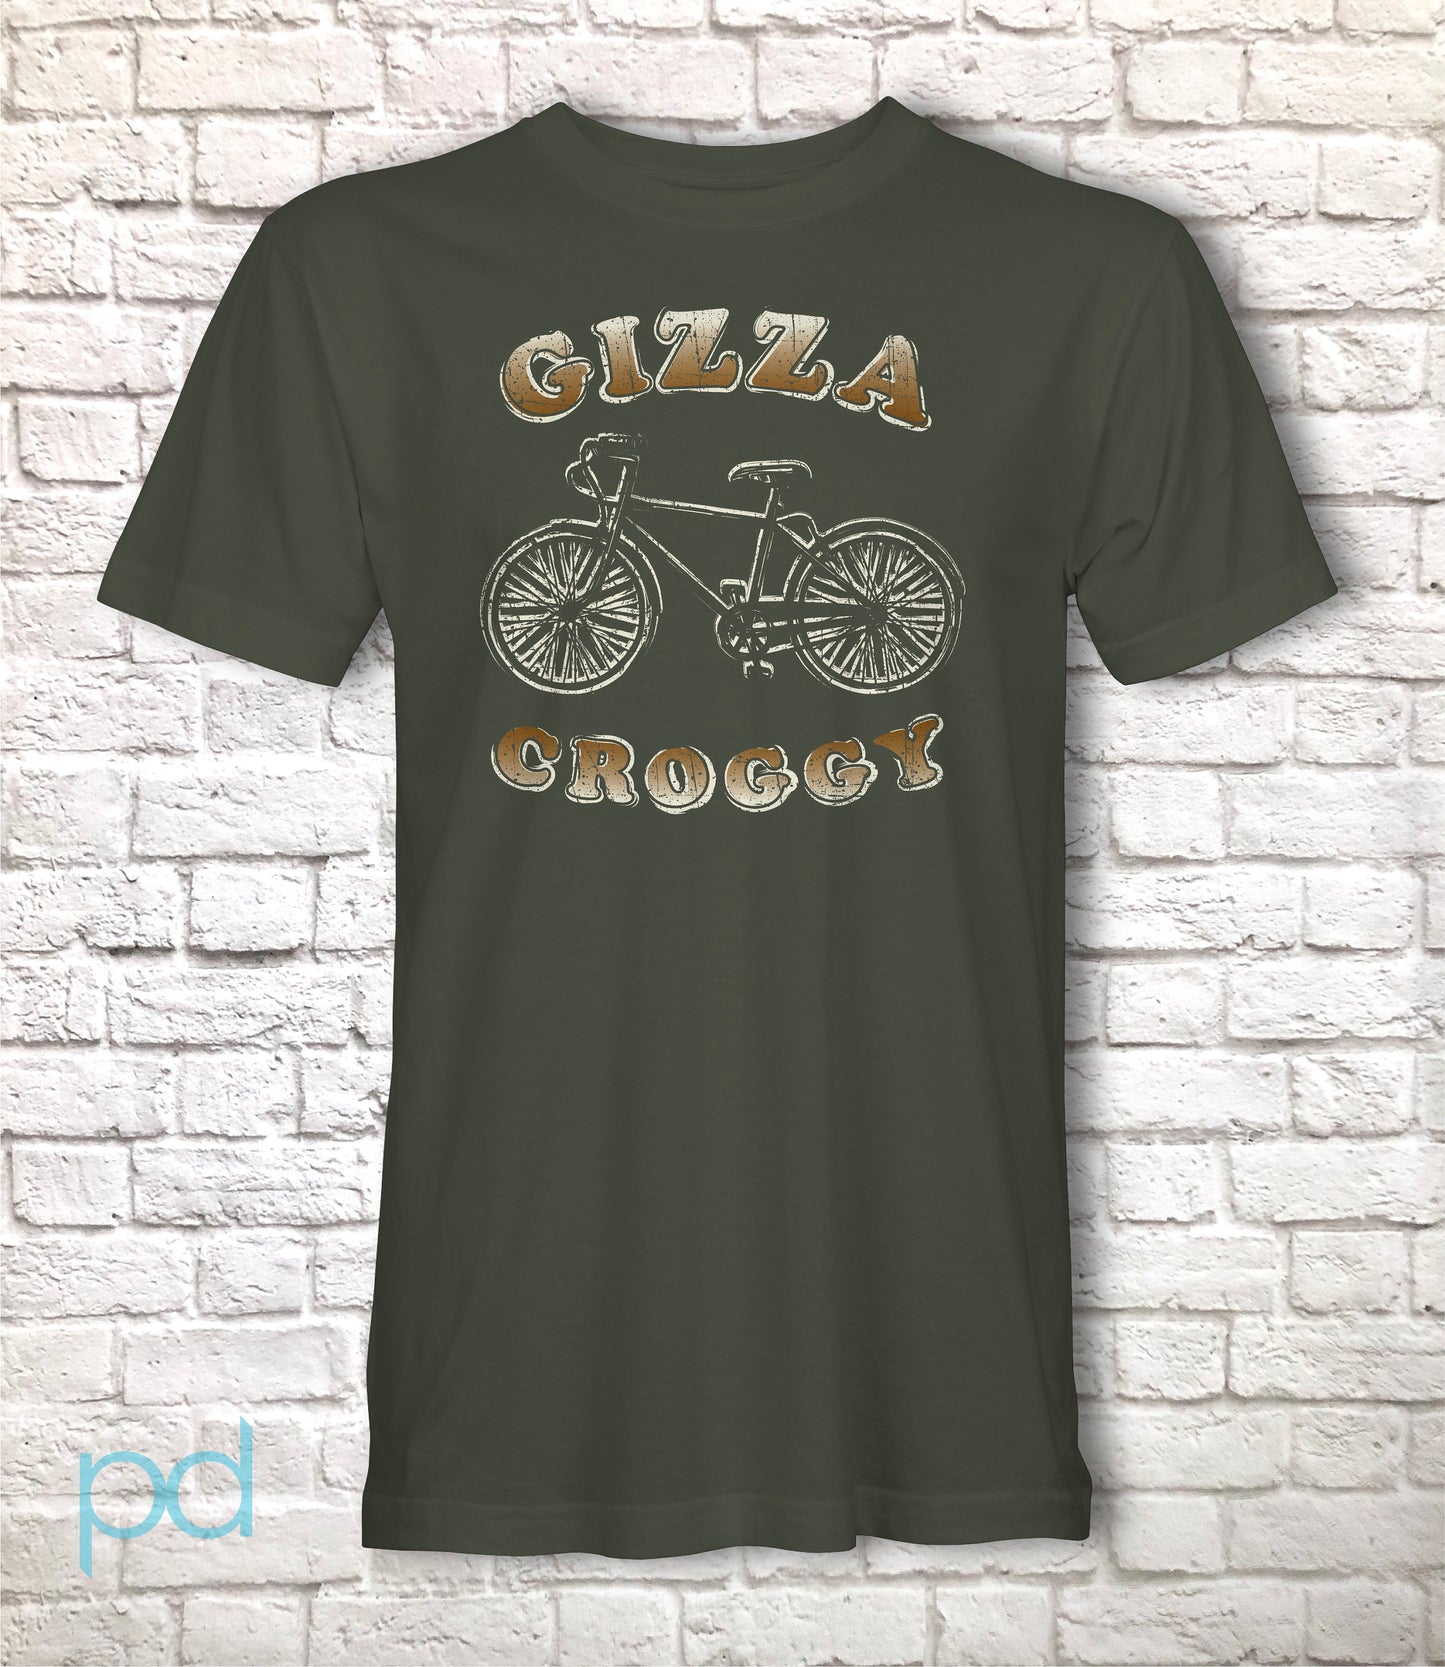 Hull T-Shirt, Gizza Croggy &#39;ull Dialect Tee, Kingston Upon Hull Accent Slang Unisex Short Sleeve Graphic Print Top, City of Culture 2017